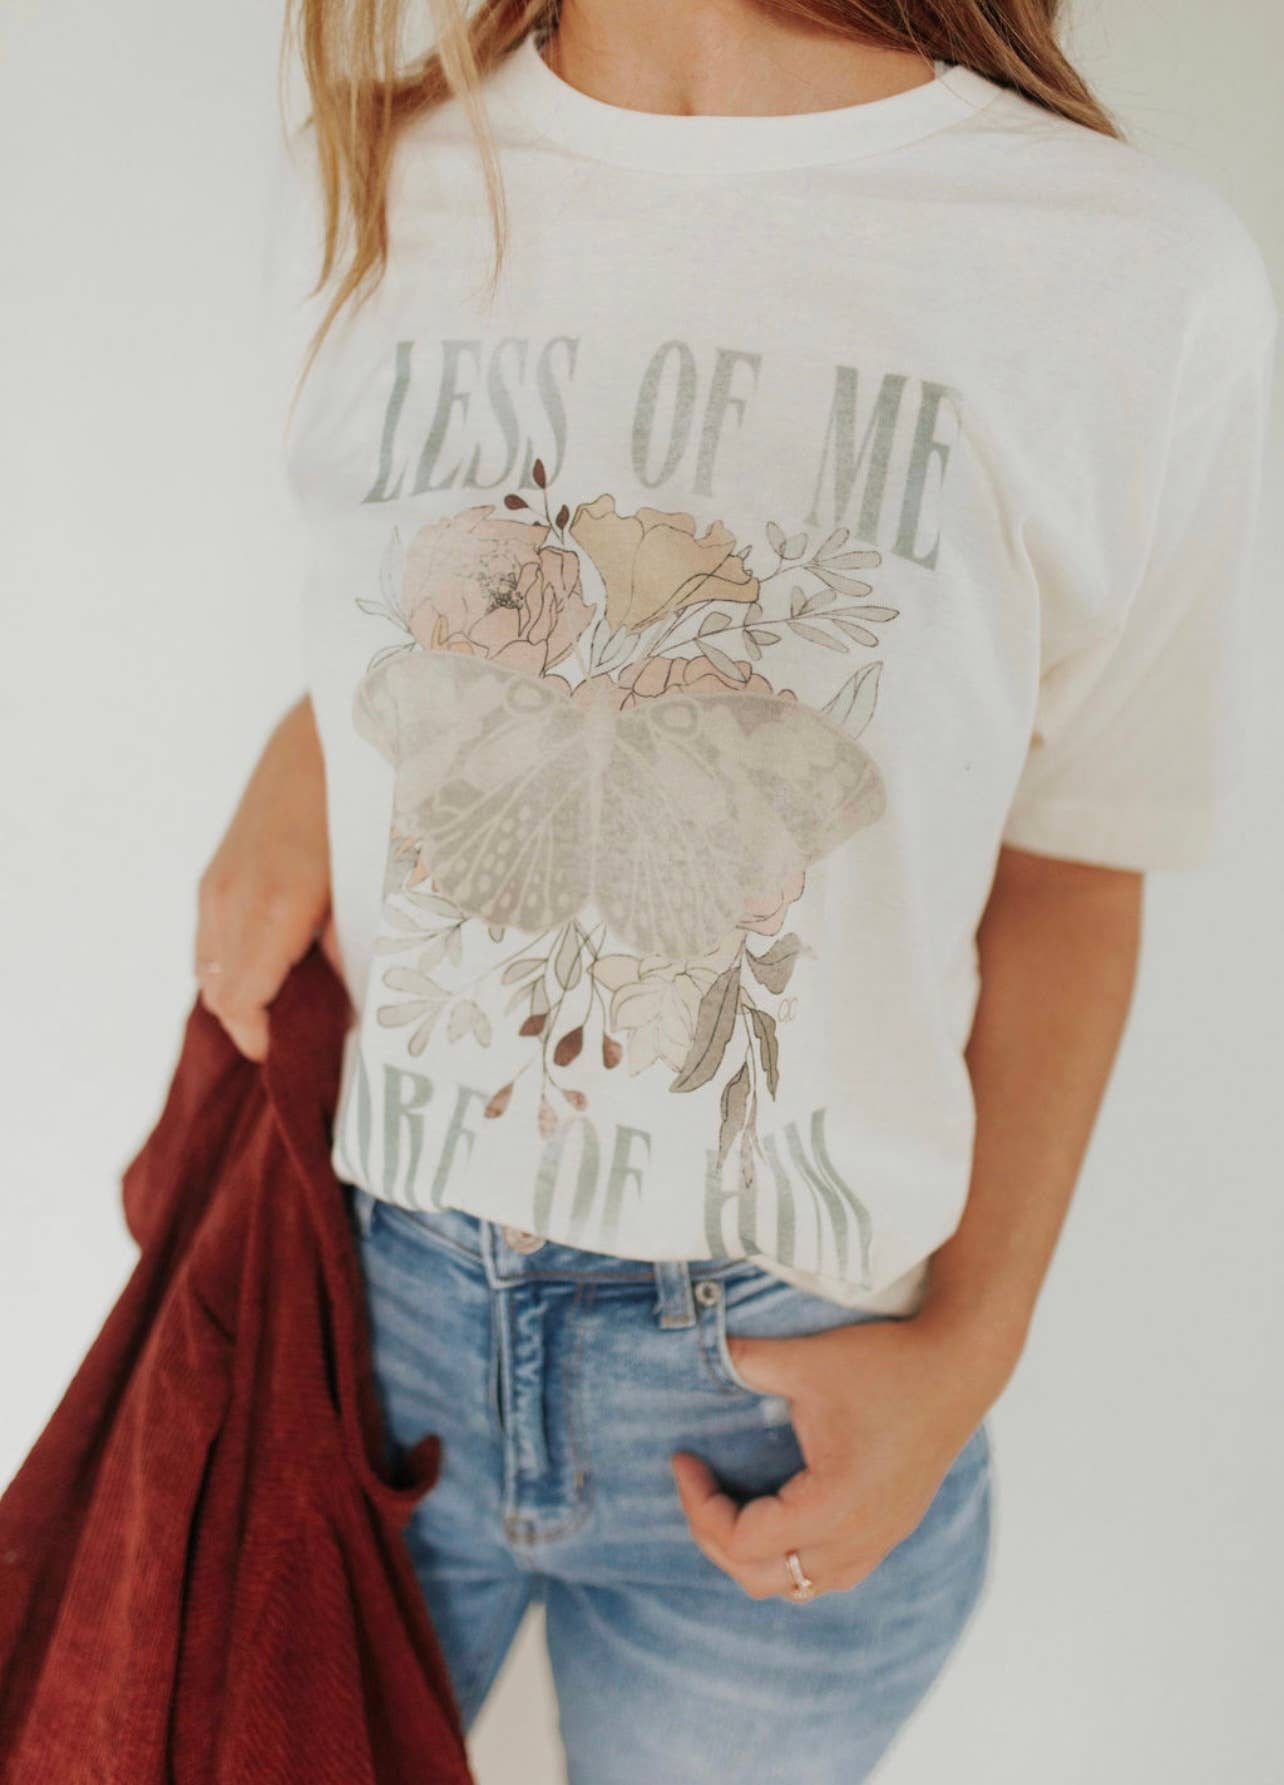 Less Of Me More Of Him Graphic Tee